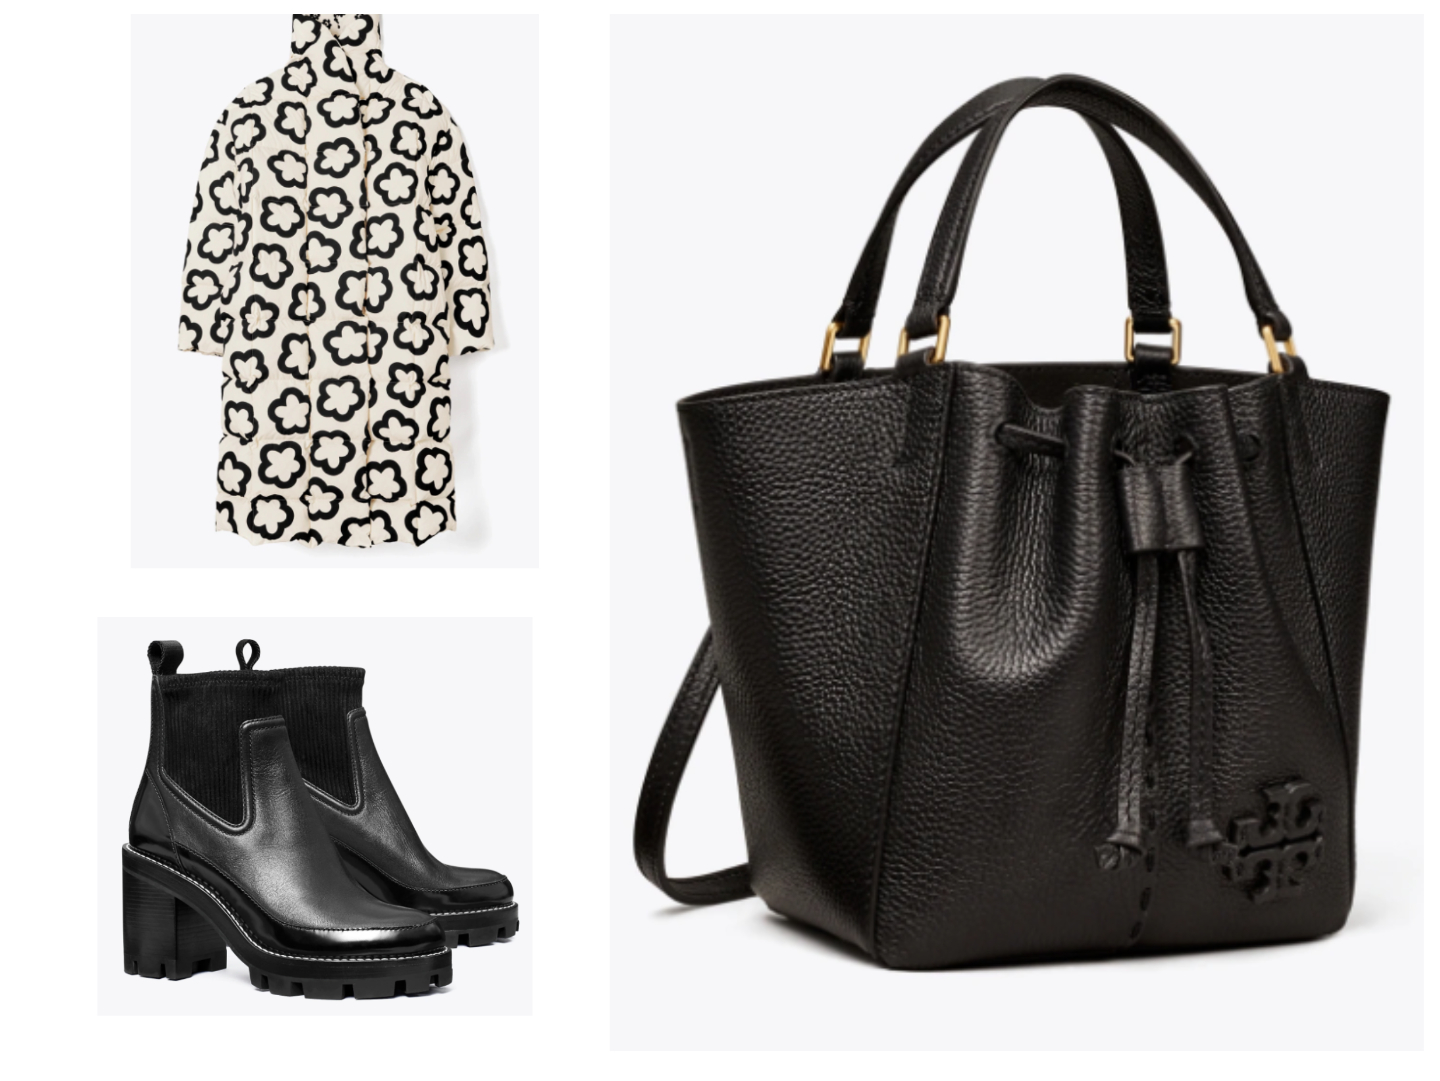 Tory Burch's semi-annual sale: Get 25% off boots, bags and more 